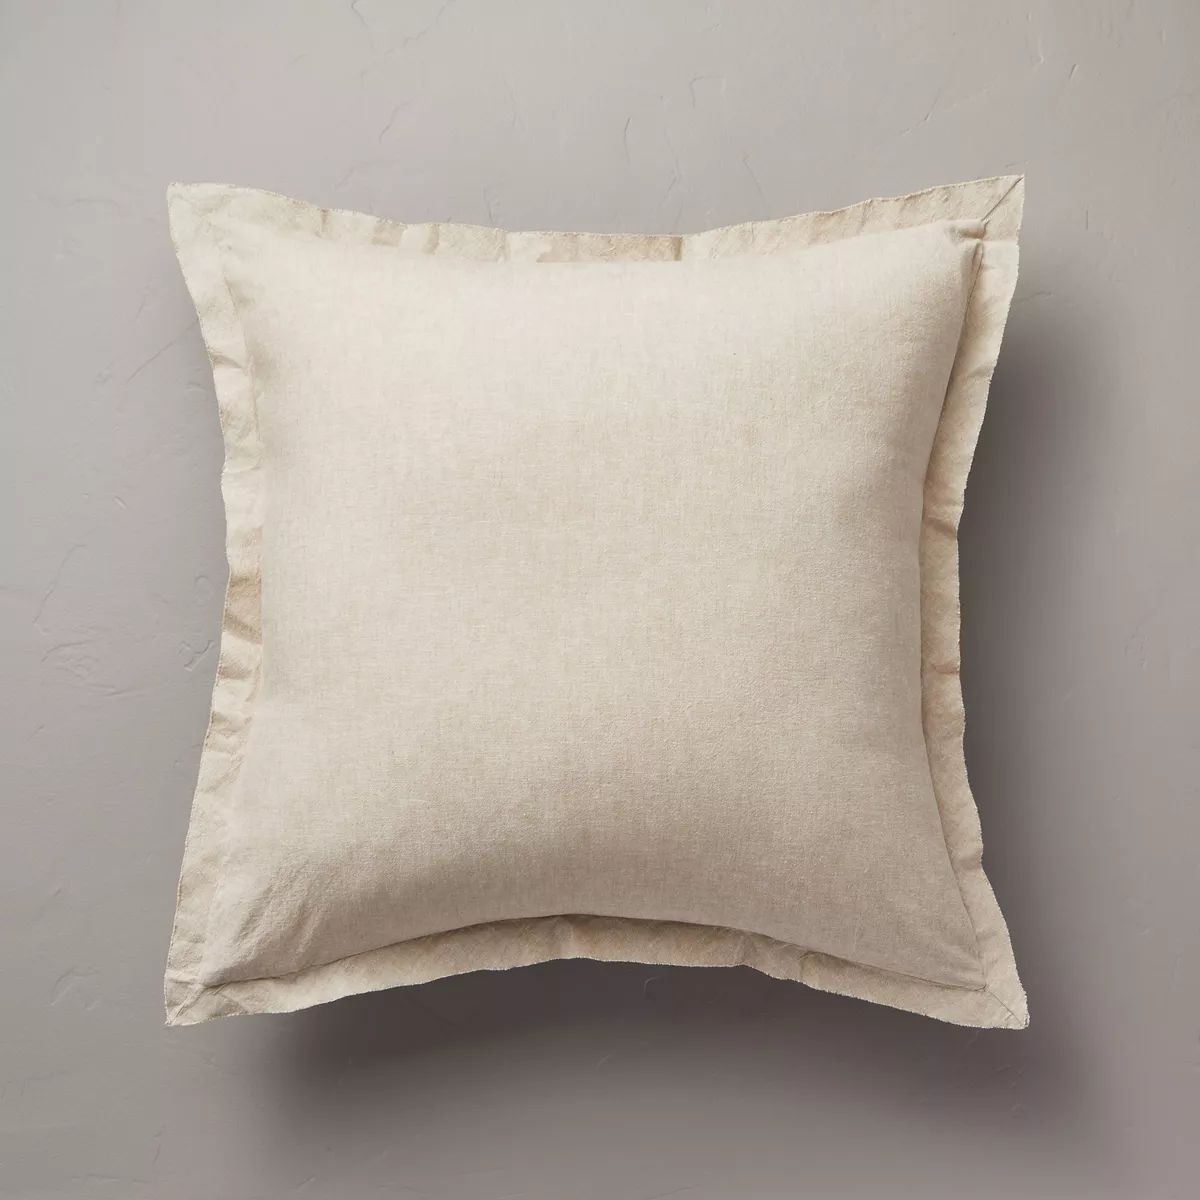 26"x26" Linen Blend Euro Bed Pillow Taupe - Hearth & Hand™ with Magnolia | Target